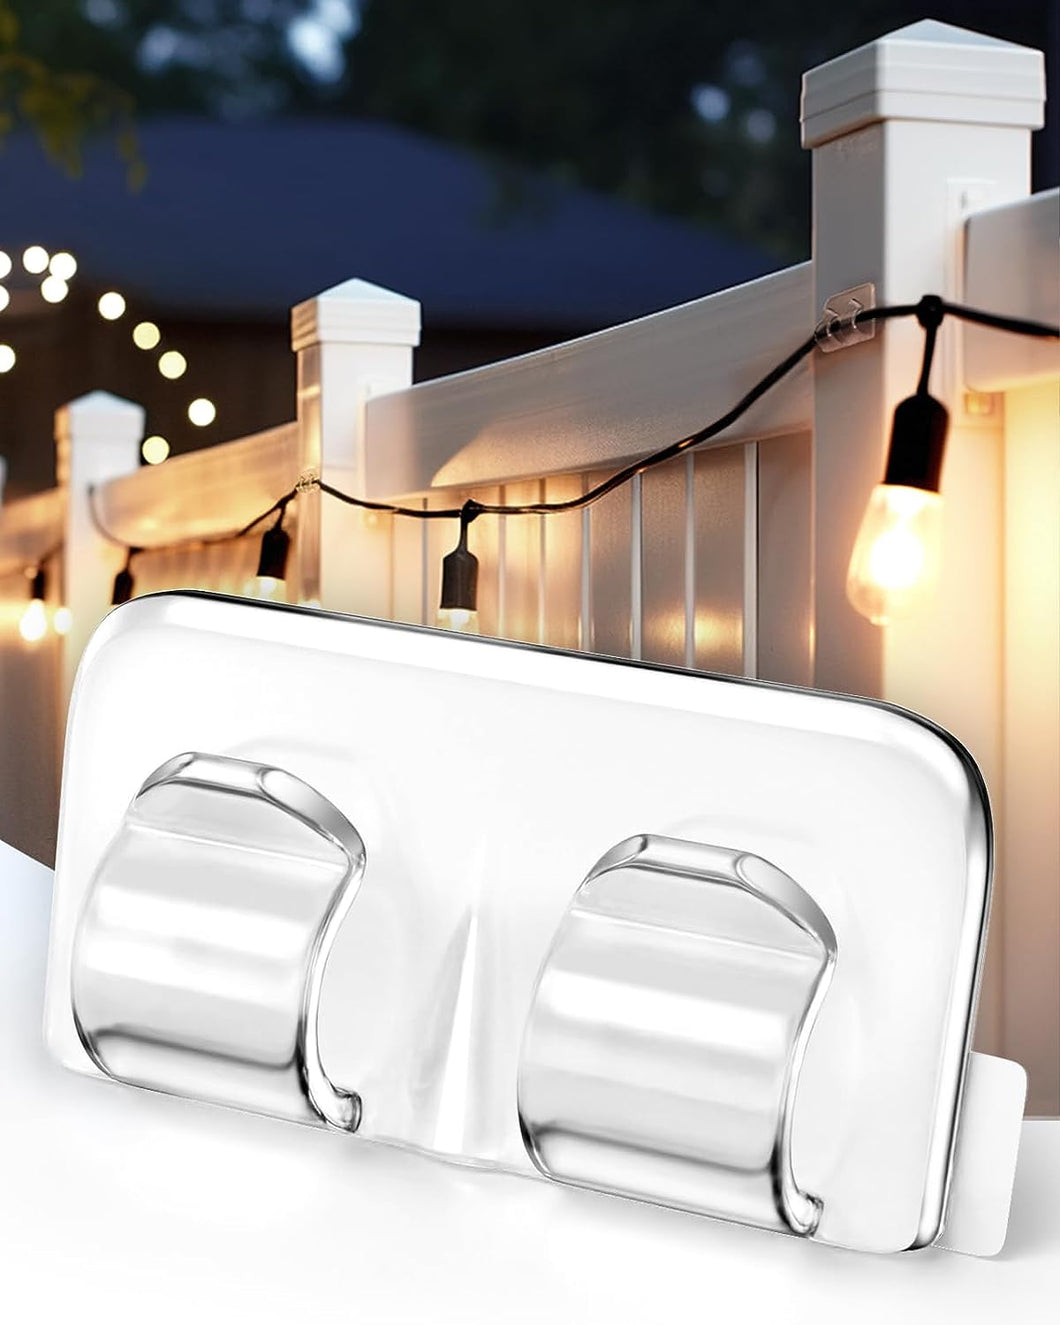 VENETIO Outdoor String Lights Clips: 26Pcs Heavy Duty Light Hooks with Waterproof Adhesive Strips - Clear Cord Holders for Hanging Christmas Lighting. Perfect for Outdoor Use ➡ OD-00016